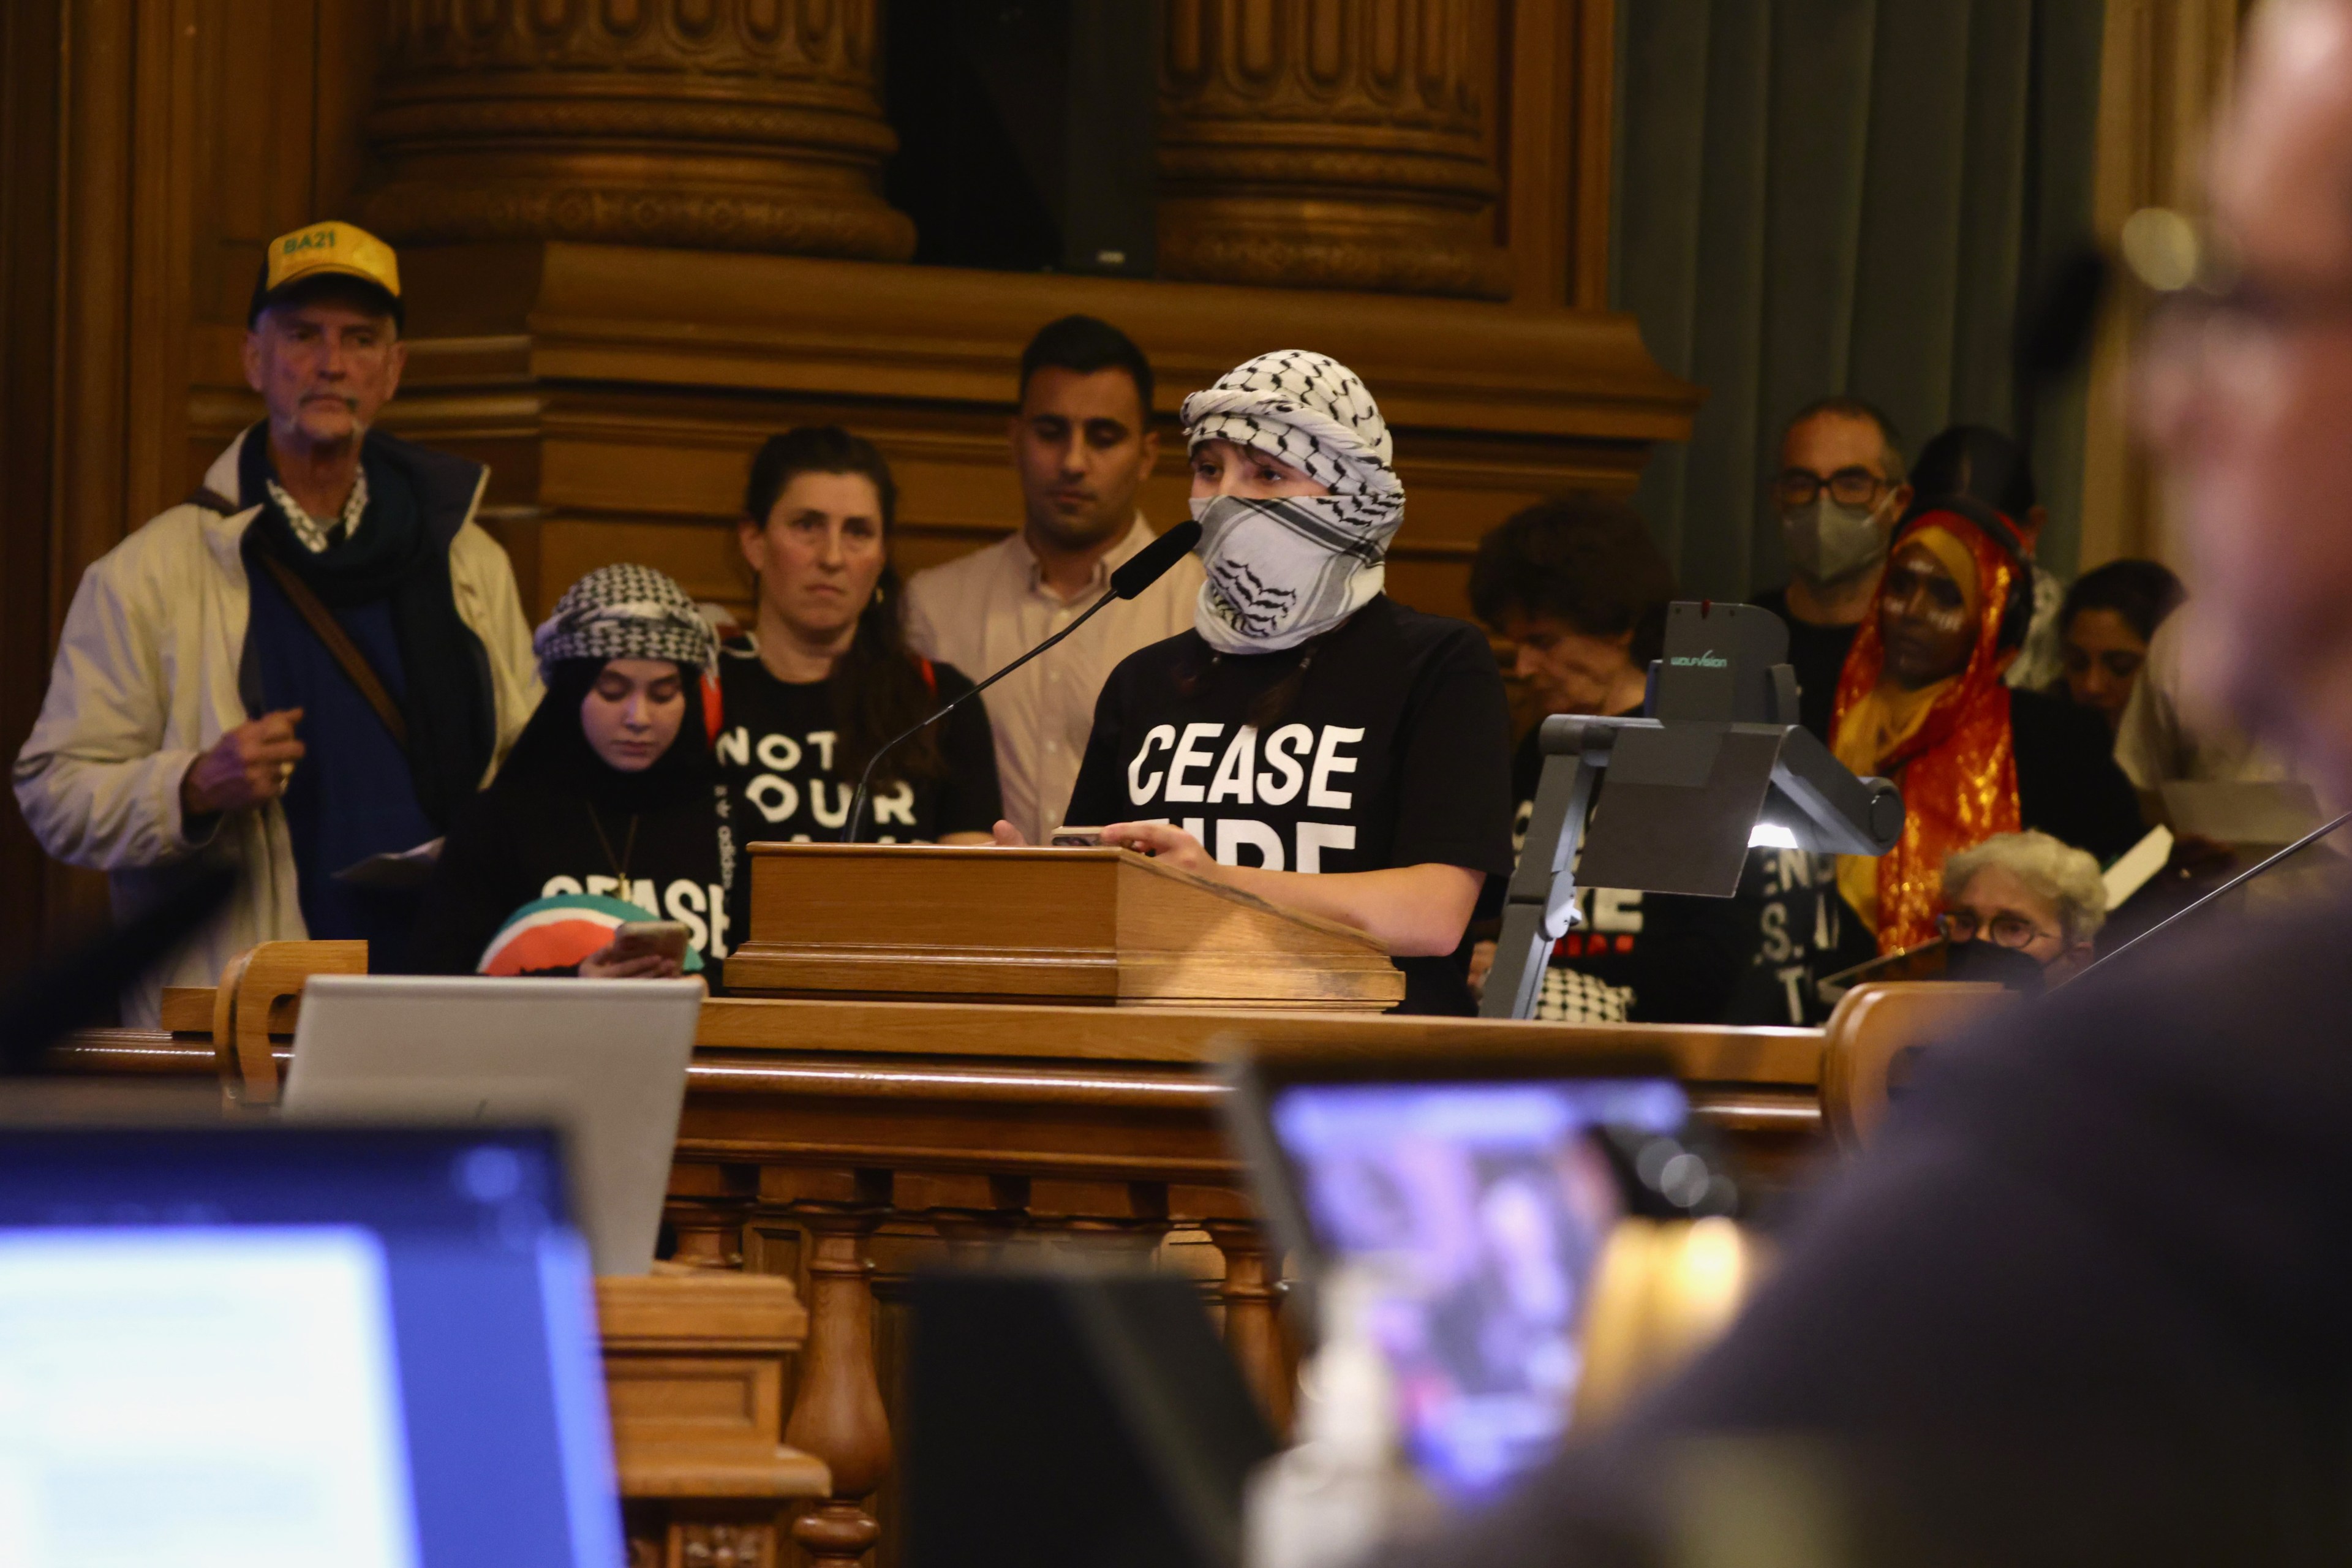 A person in a keffiyeh and mask speaks at a podium, with listeners wearing "Ceasefire" shirts behind them in a wood-paneled room.